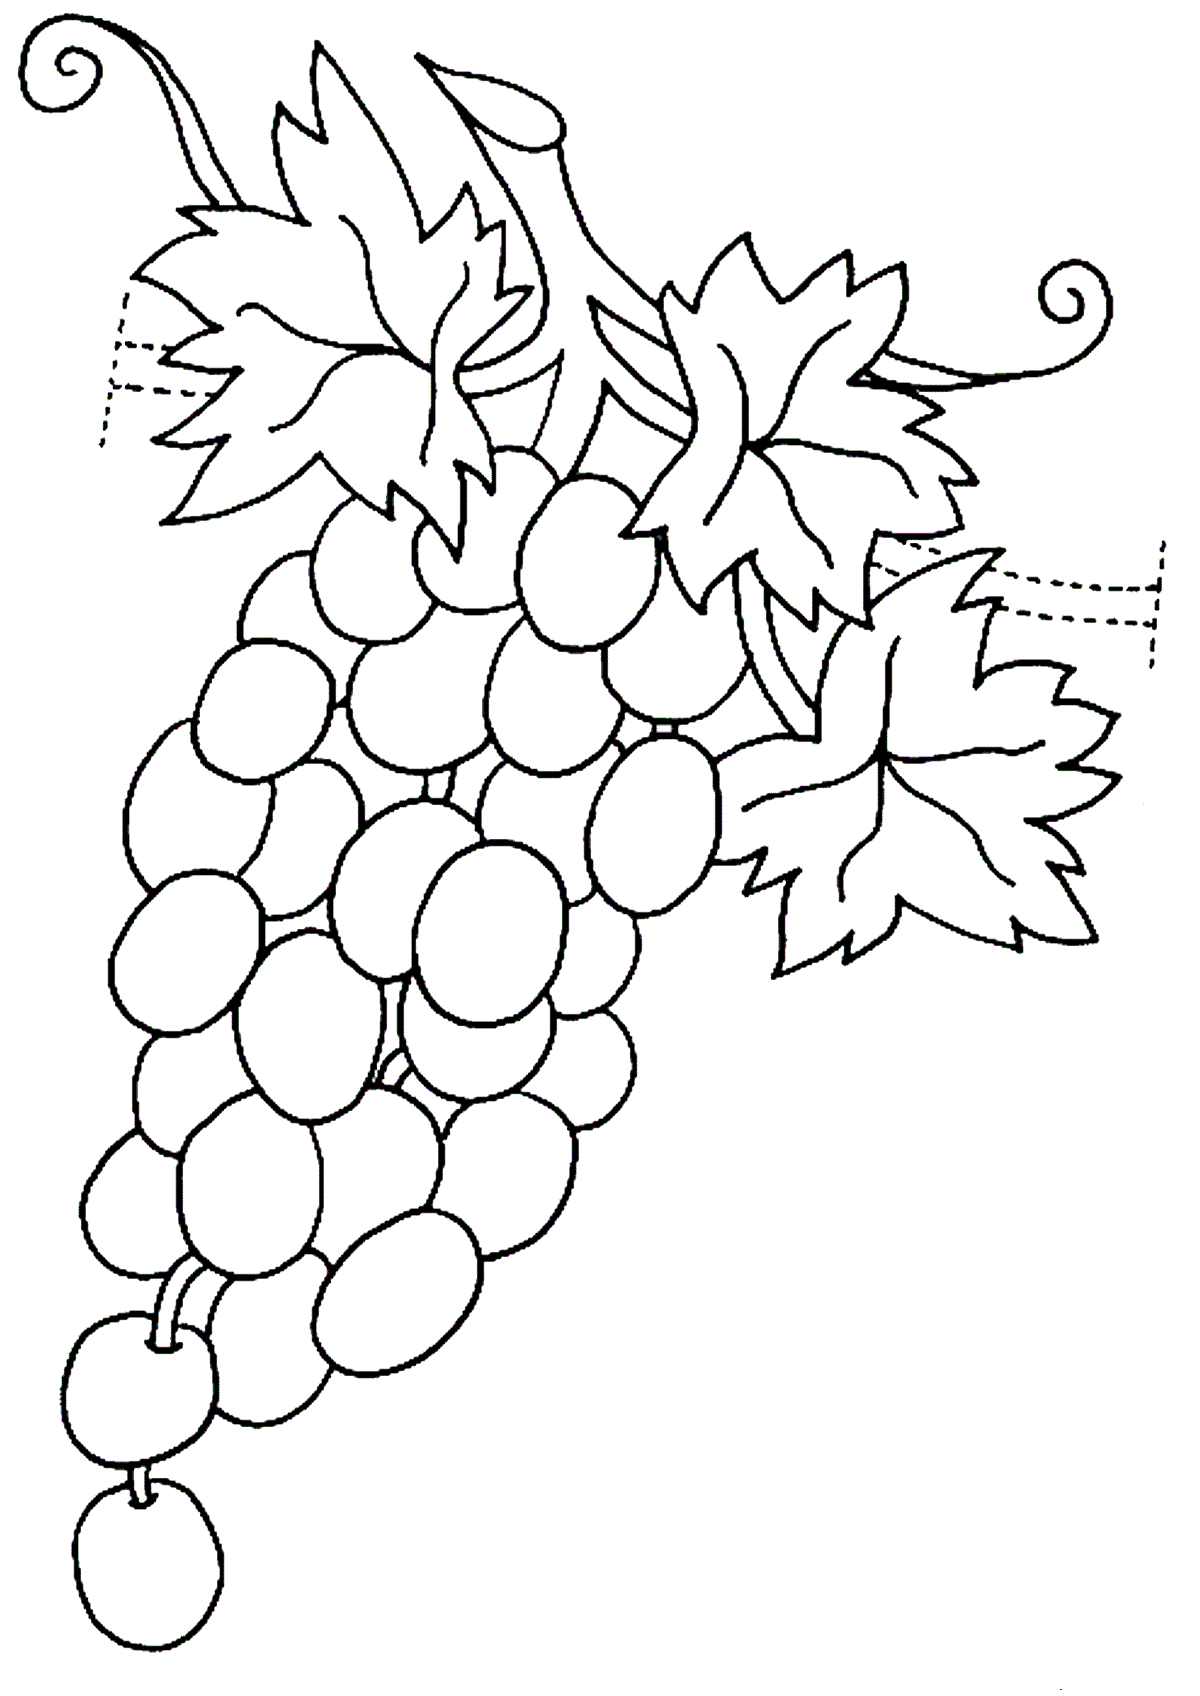 Download Grapes coloring pages to download and print for free